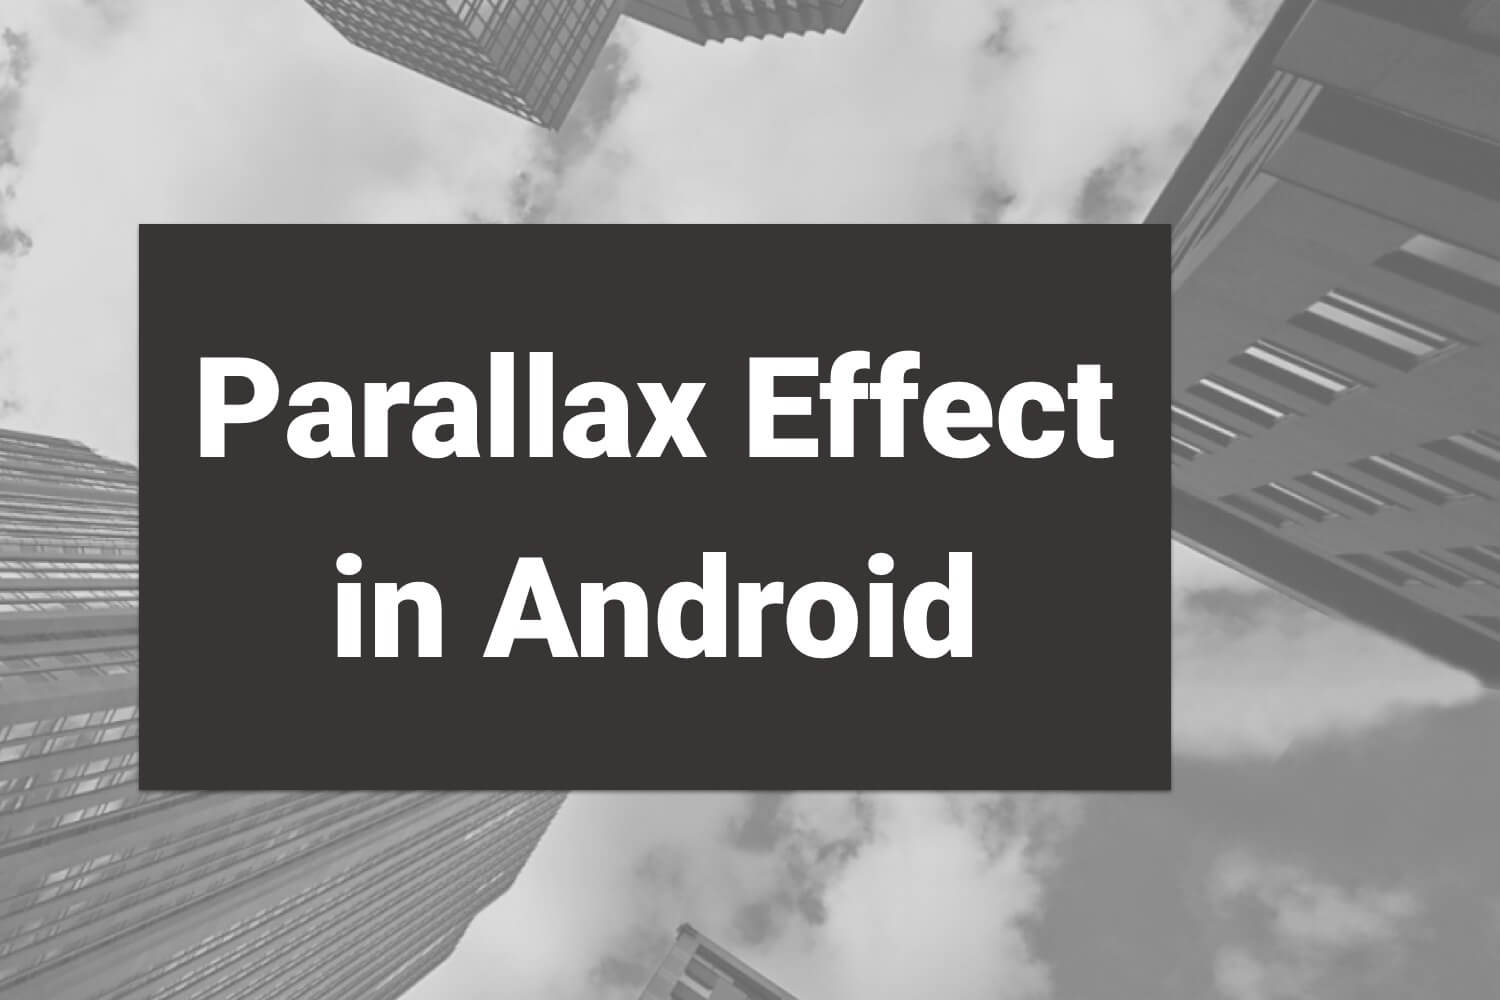 Parallax Effect in Android